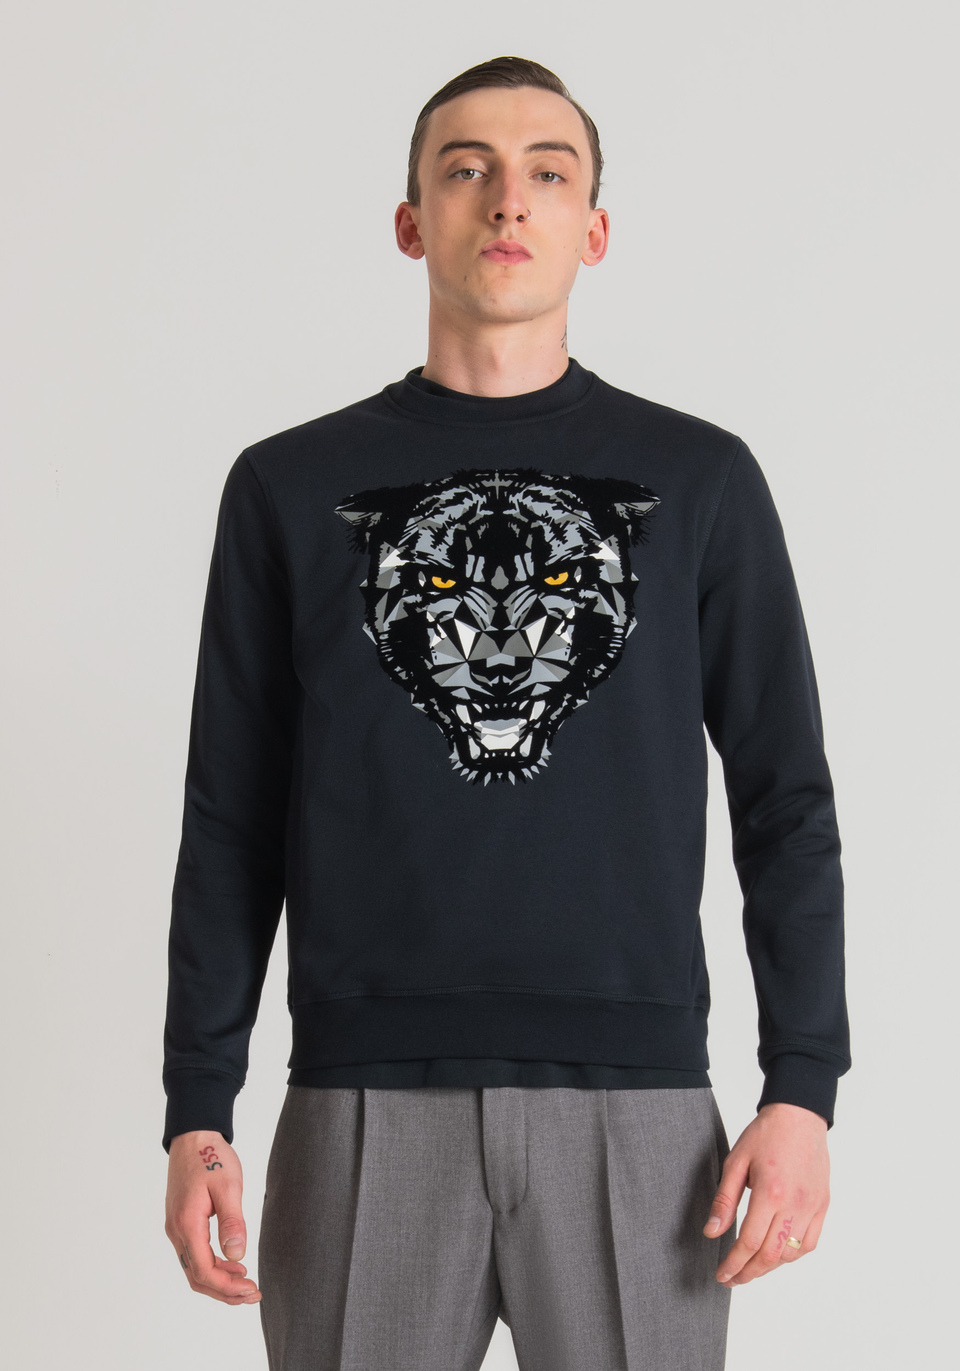 FABRIC Antony Morato WITH FIT PANTHER SWEATSHIRT BLEND | COTTON IN PRINT REGULAR